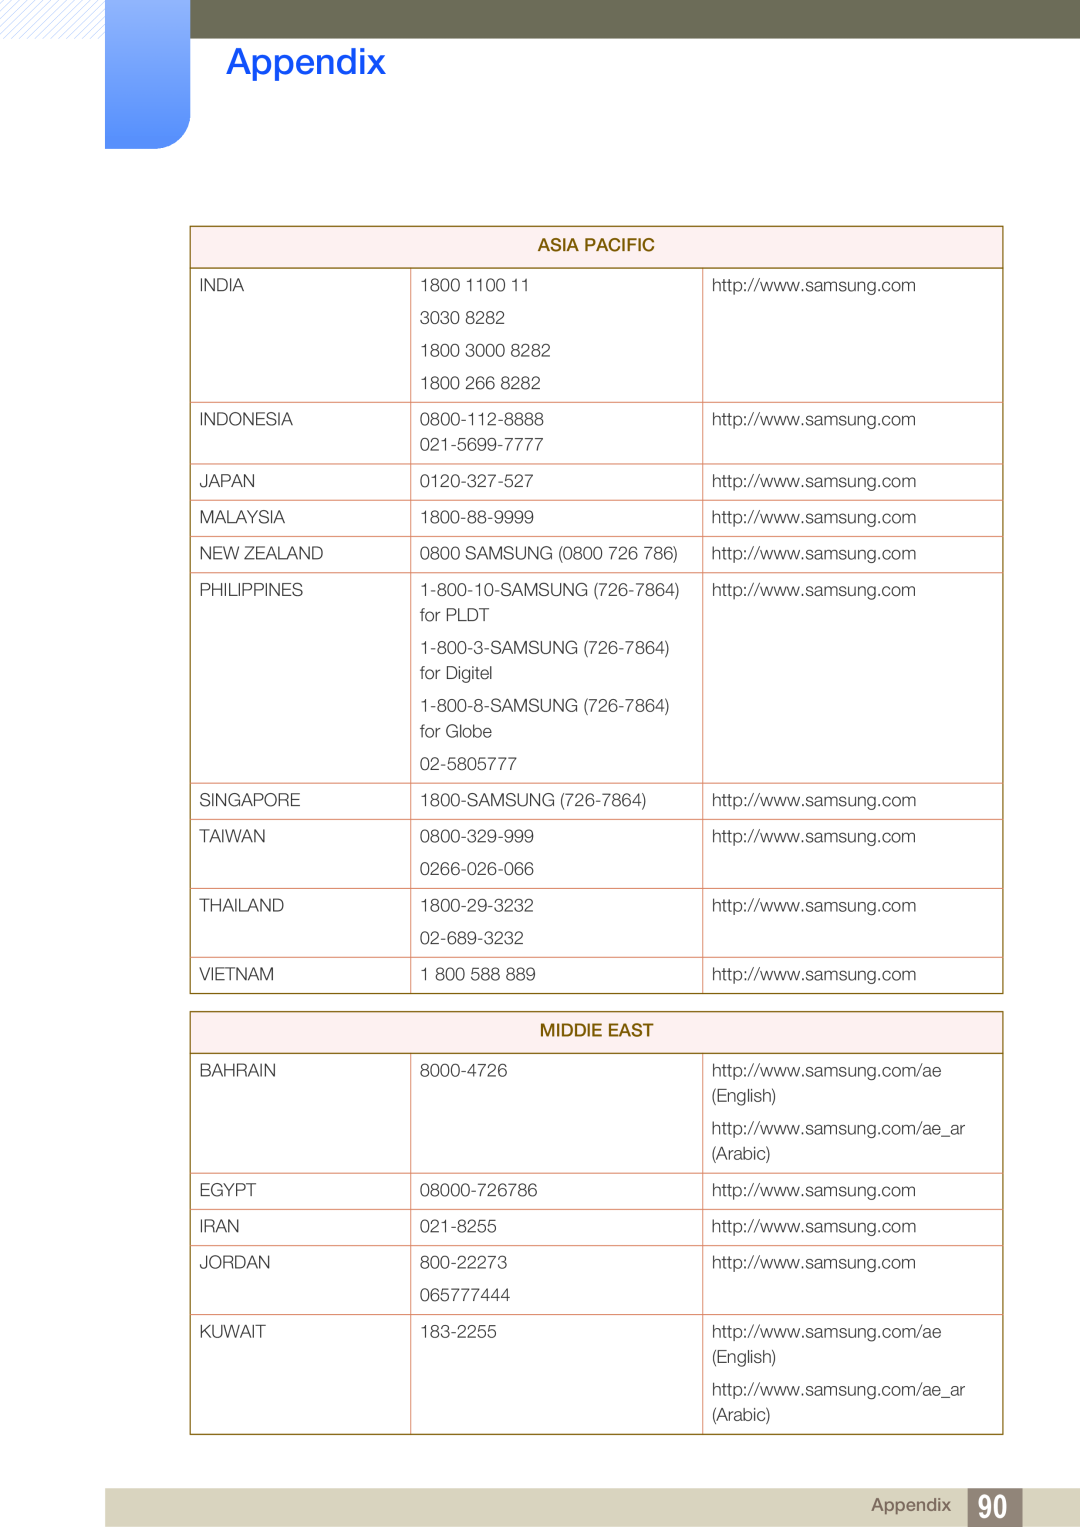 Samsung S24A850DW, S22A650D, S27A650D, S24A650D user manual Appendix, Asia Pacific, MIDDlE EAST 